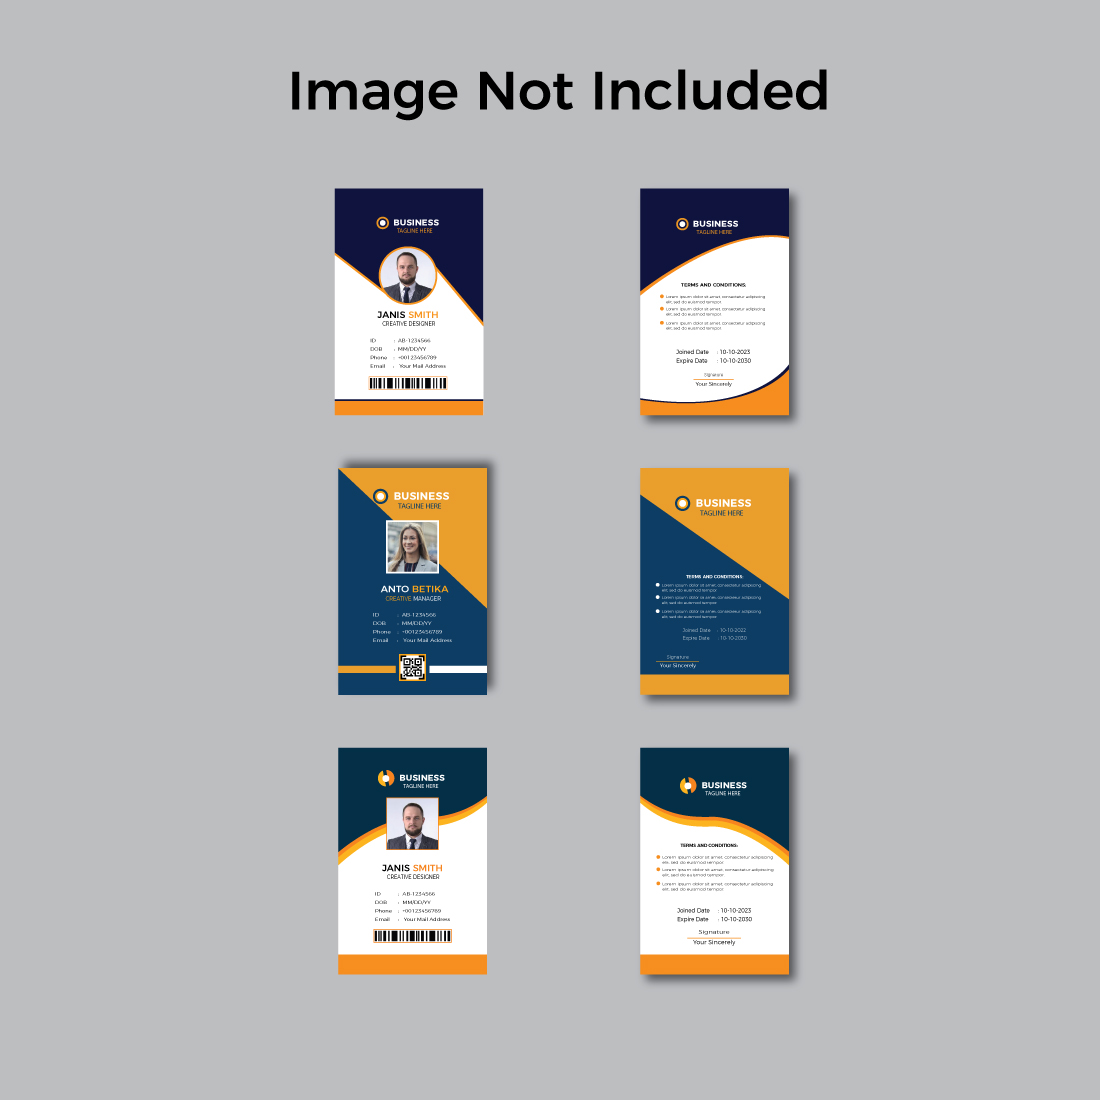 Corporate Business ID Card Template cover image.